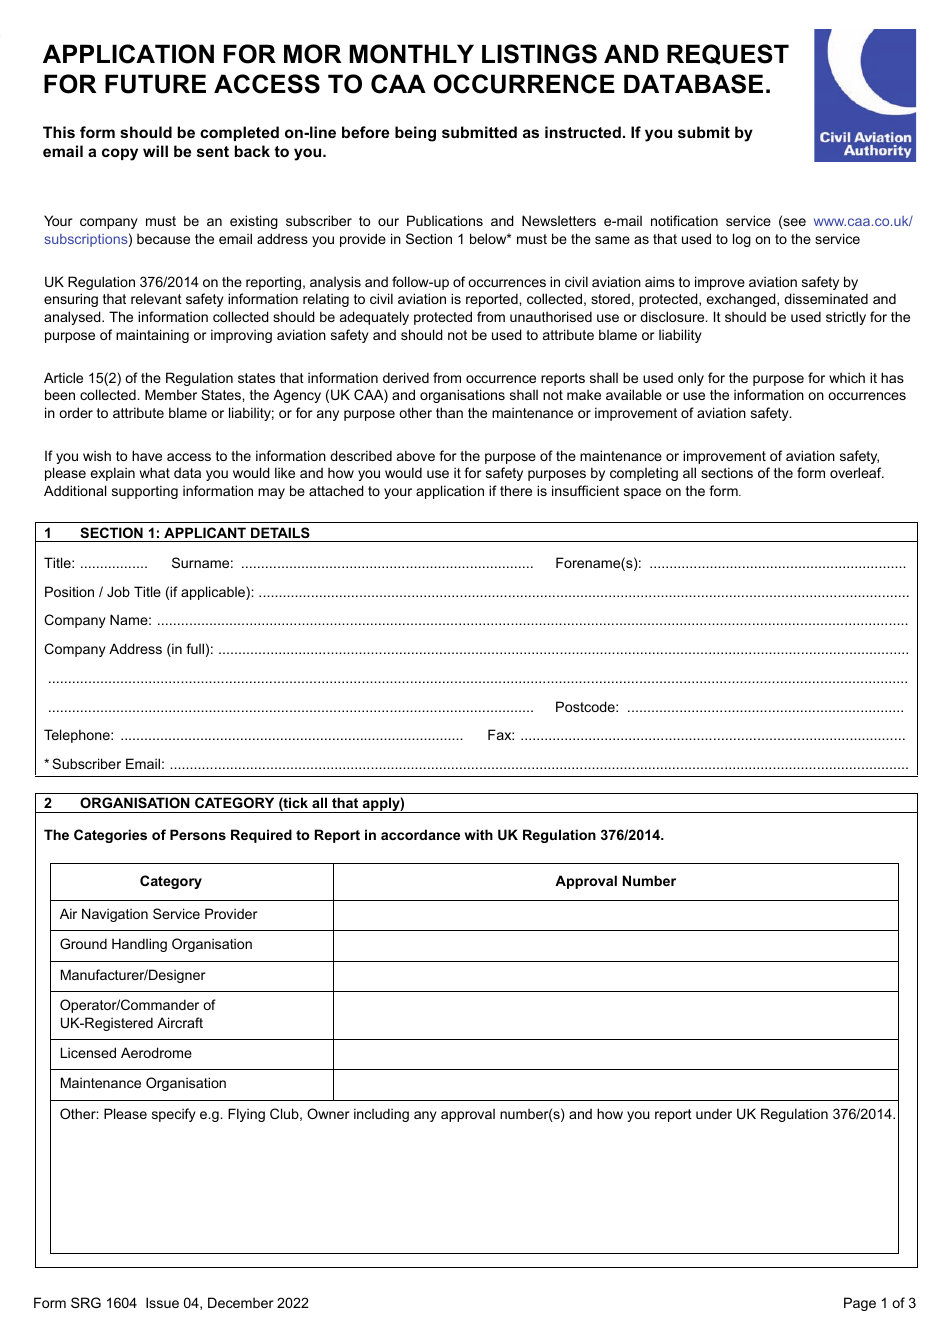 Form SRG1604 Application for Mor Monthly Listings and Request for Future Access to Caa Occurrence Database - United Kingdom, Page 1